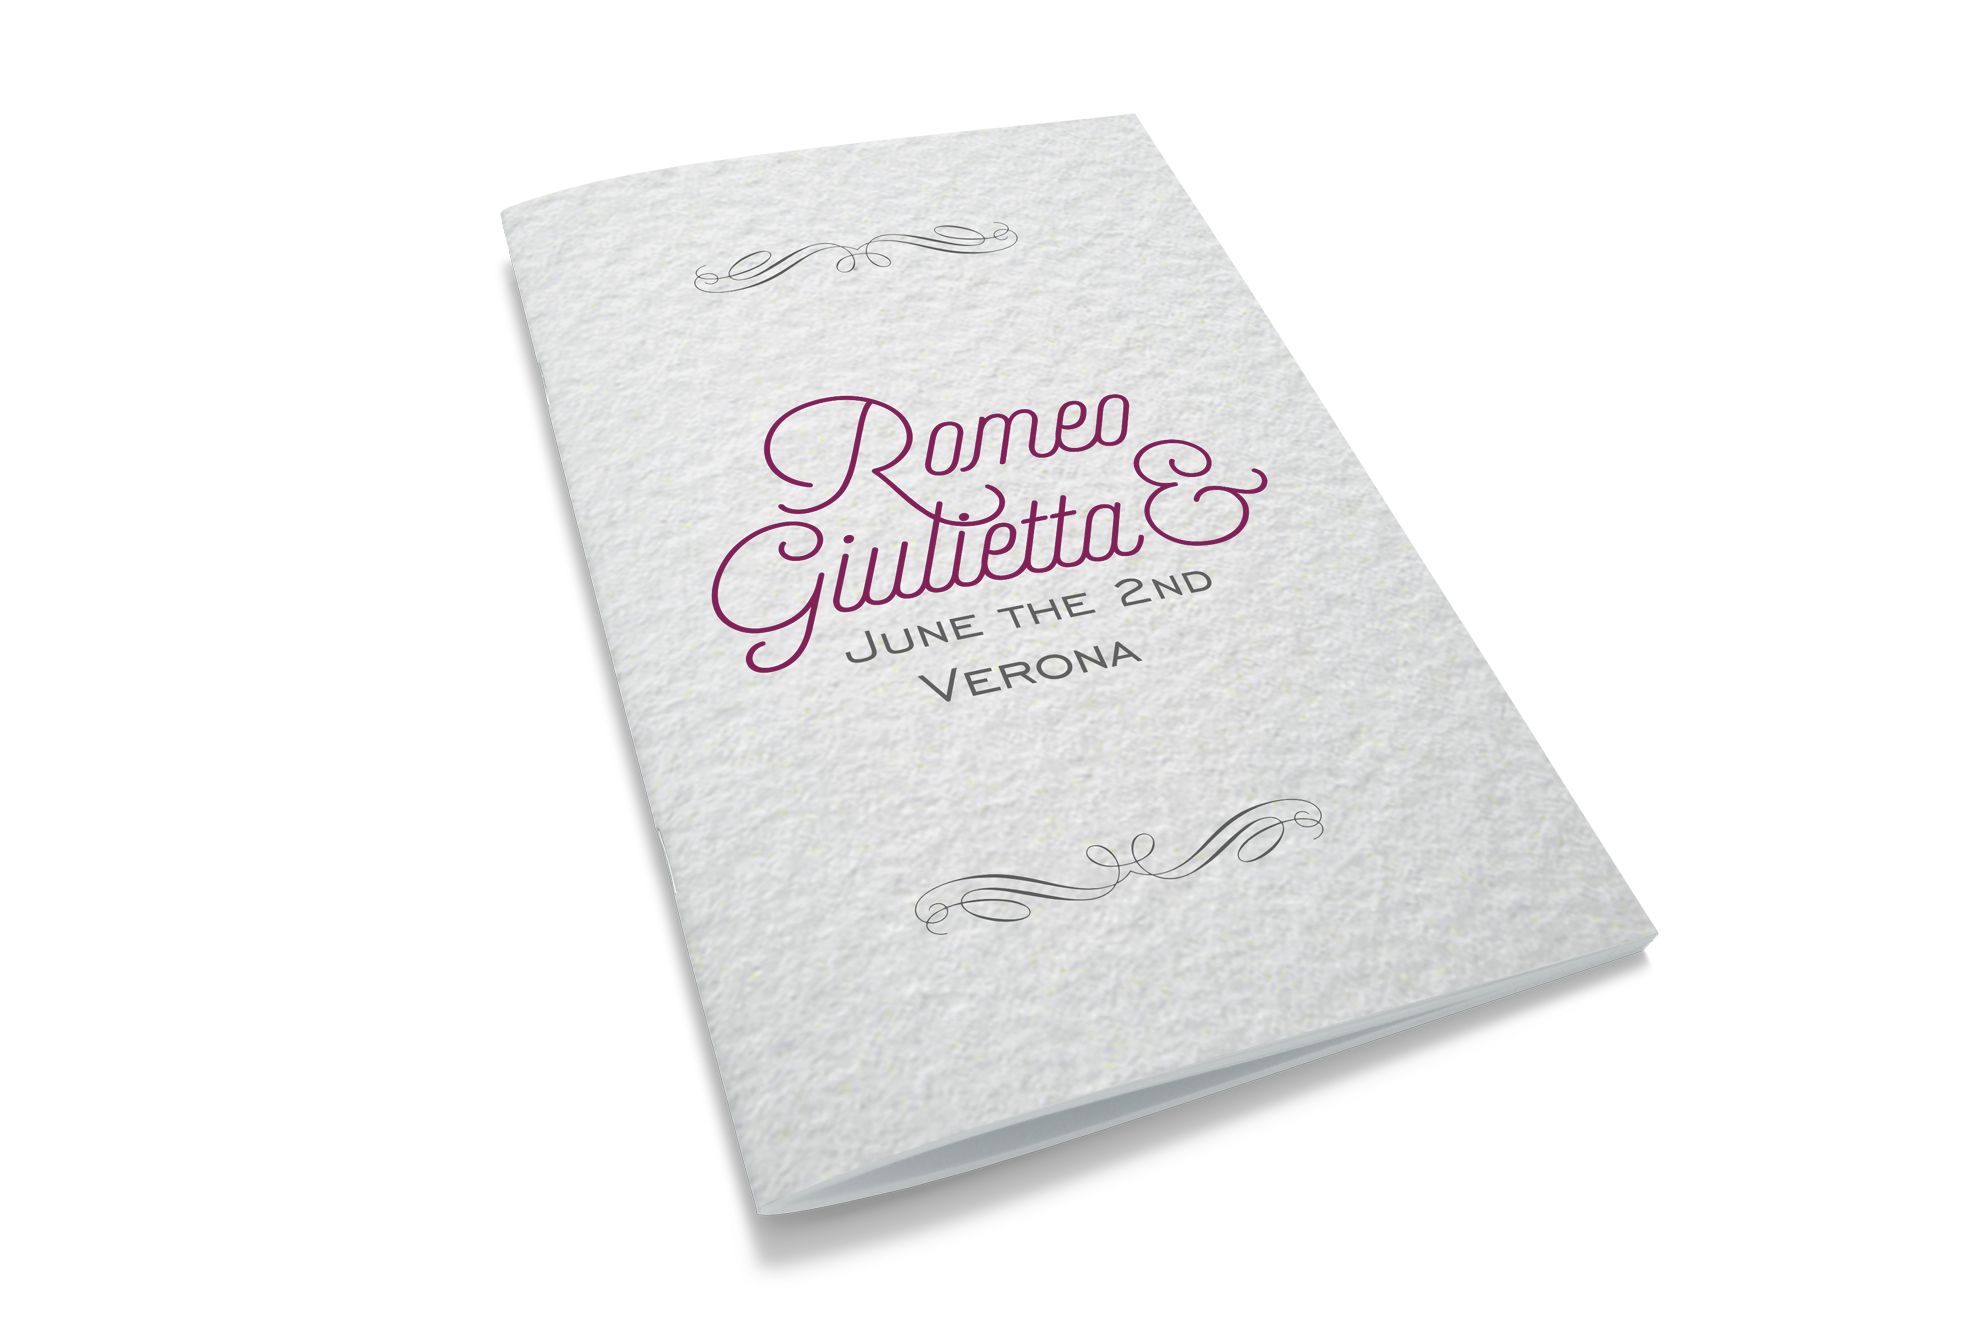 Print Wedding Mass Booklets Online, it's worth it!: Print online mass booklets. Live your wedding with sacrality and respect. Realise your customised mass booklets for your wedding day with Sprint 24.